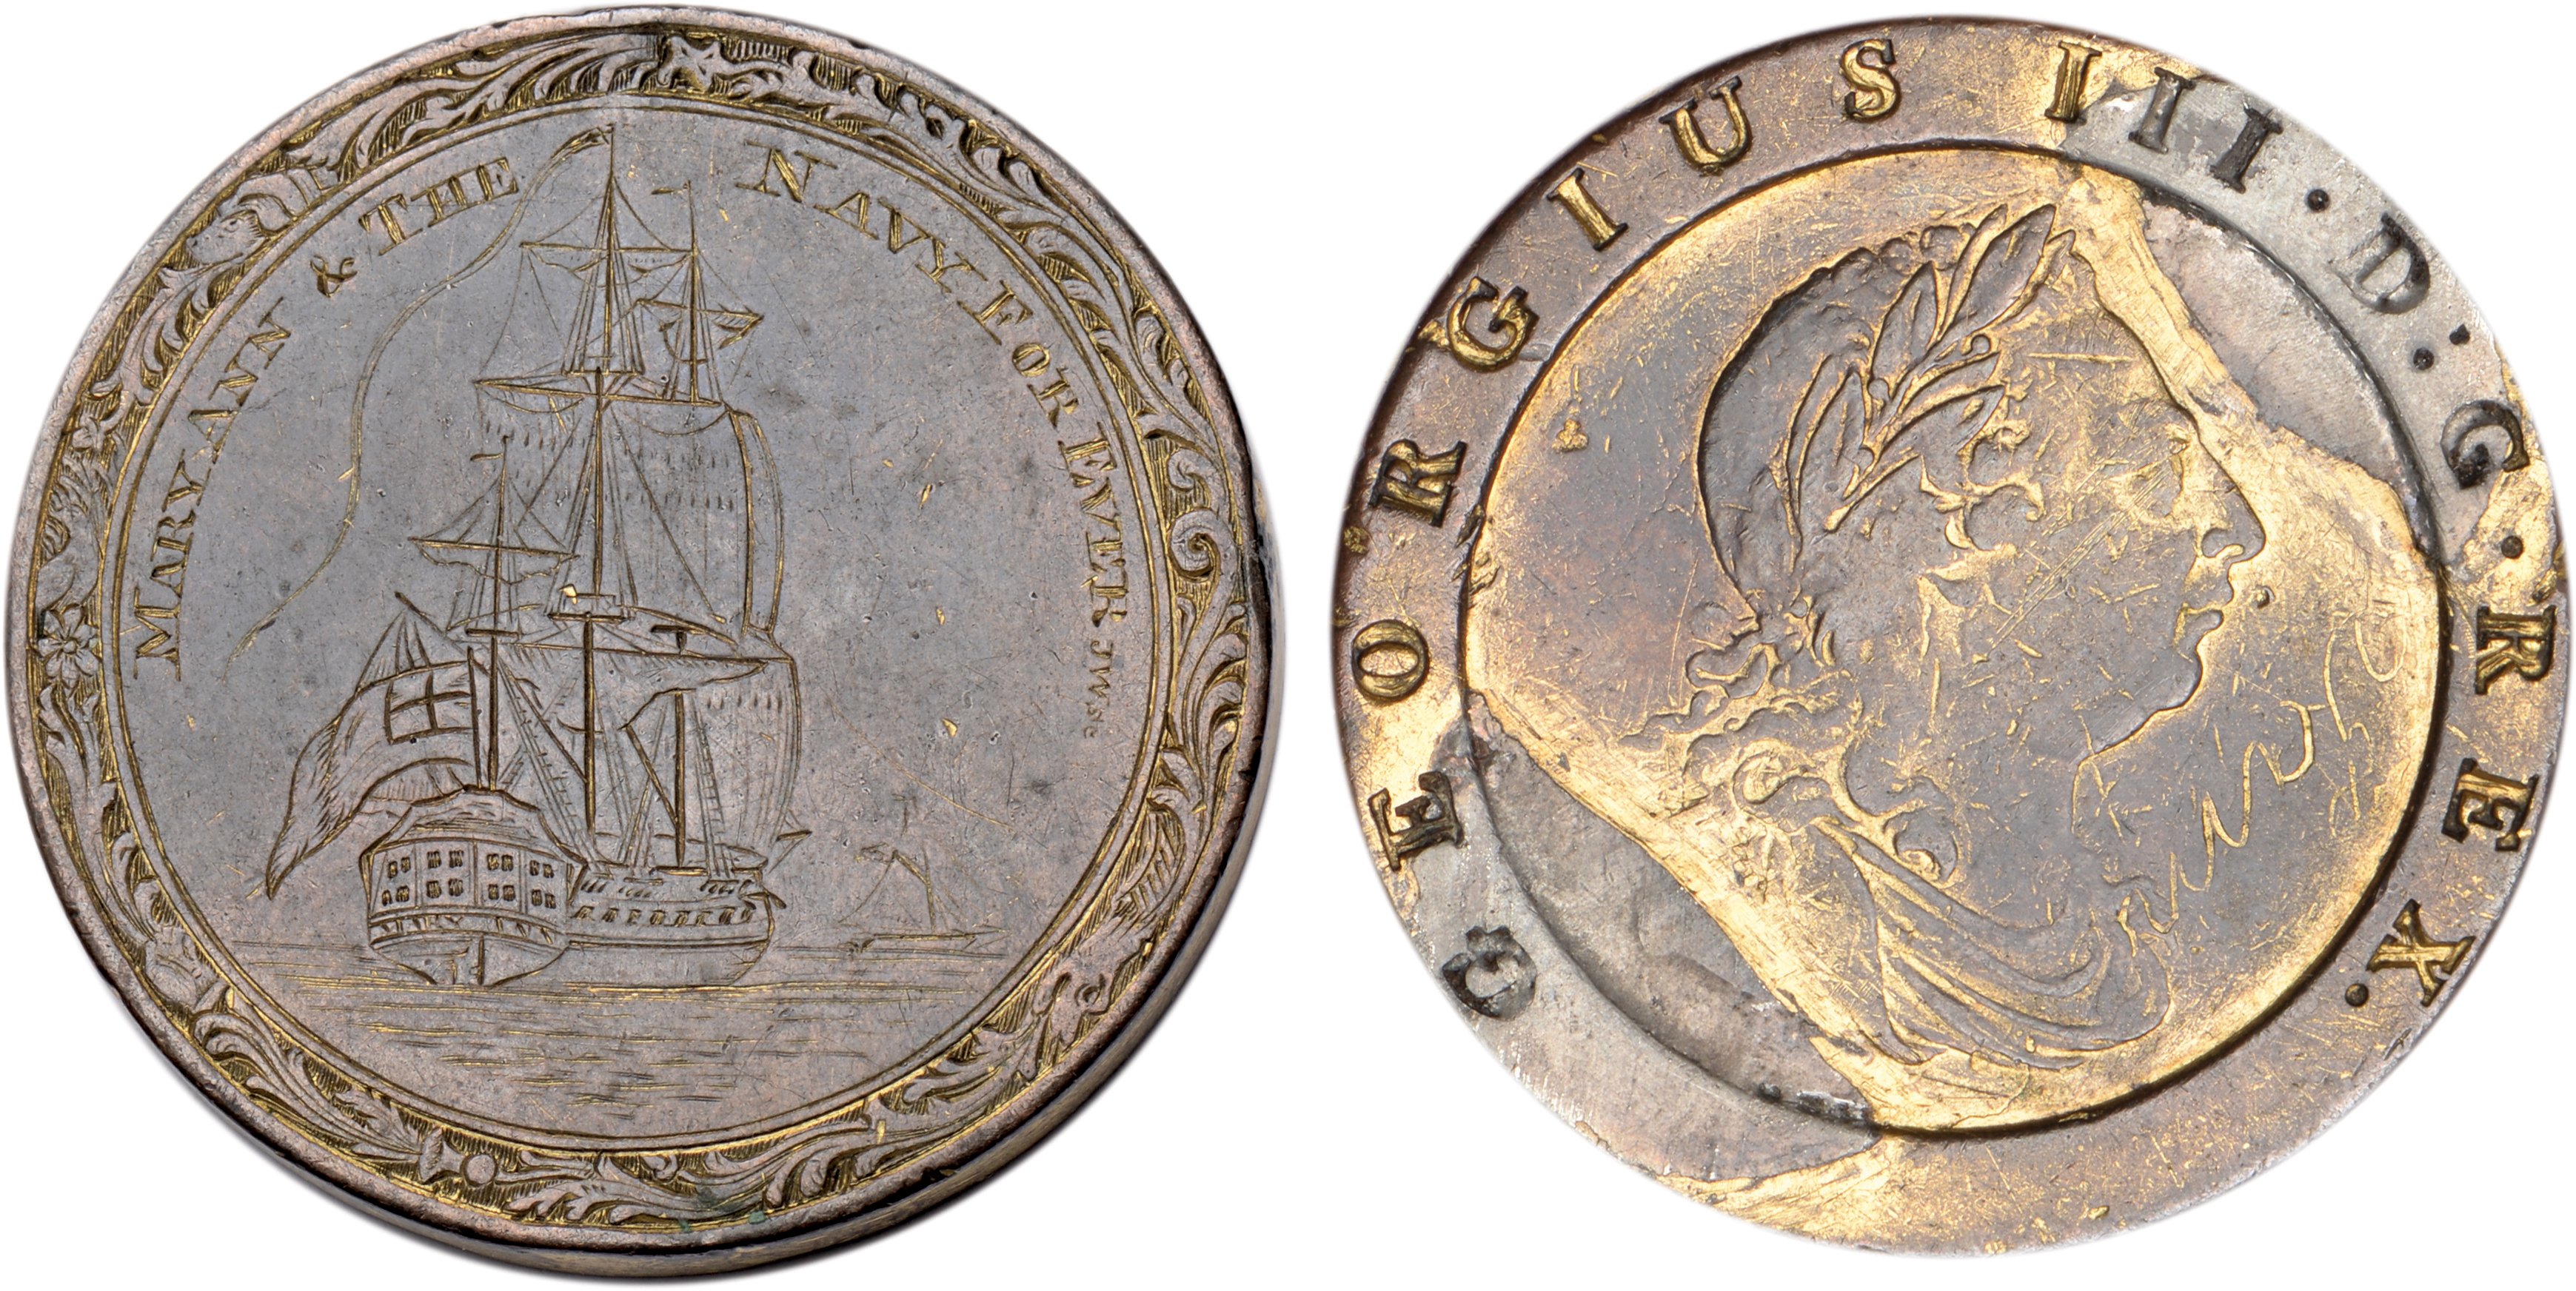 The Mary Ann, a George III ‘Cartwheel’ twopence, the reverse smoothed and engraved with a stern to